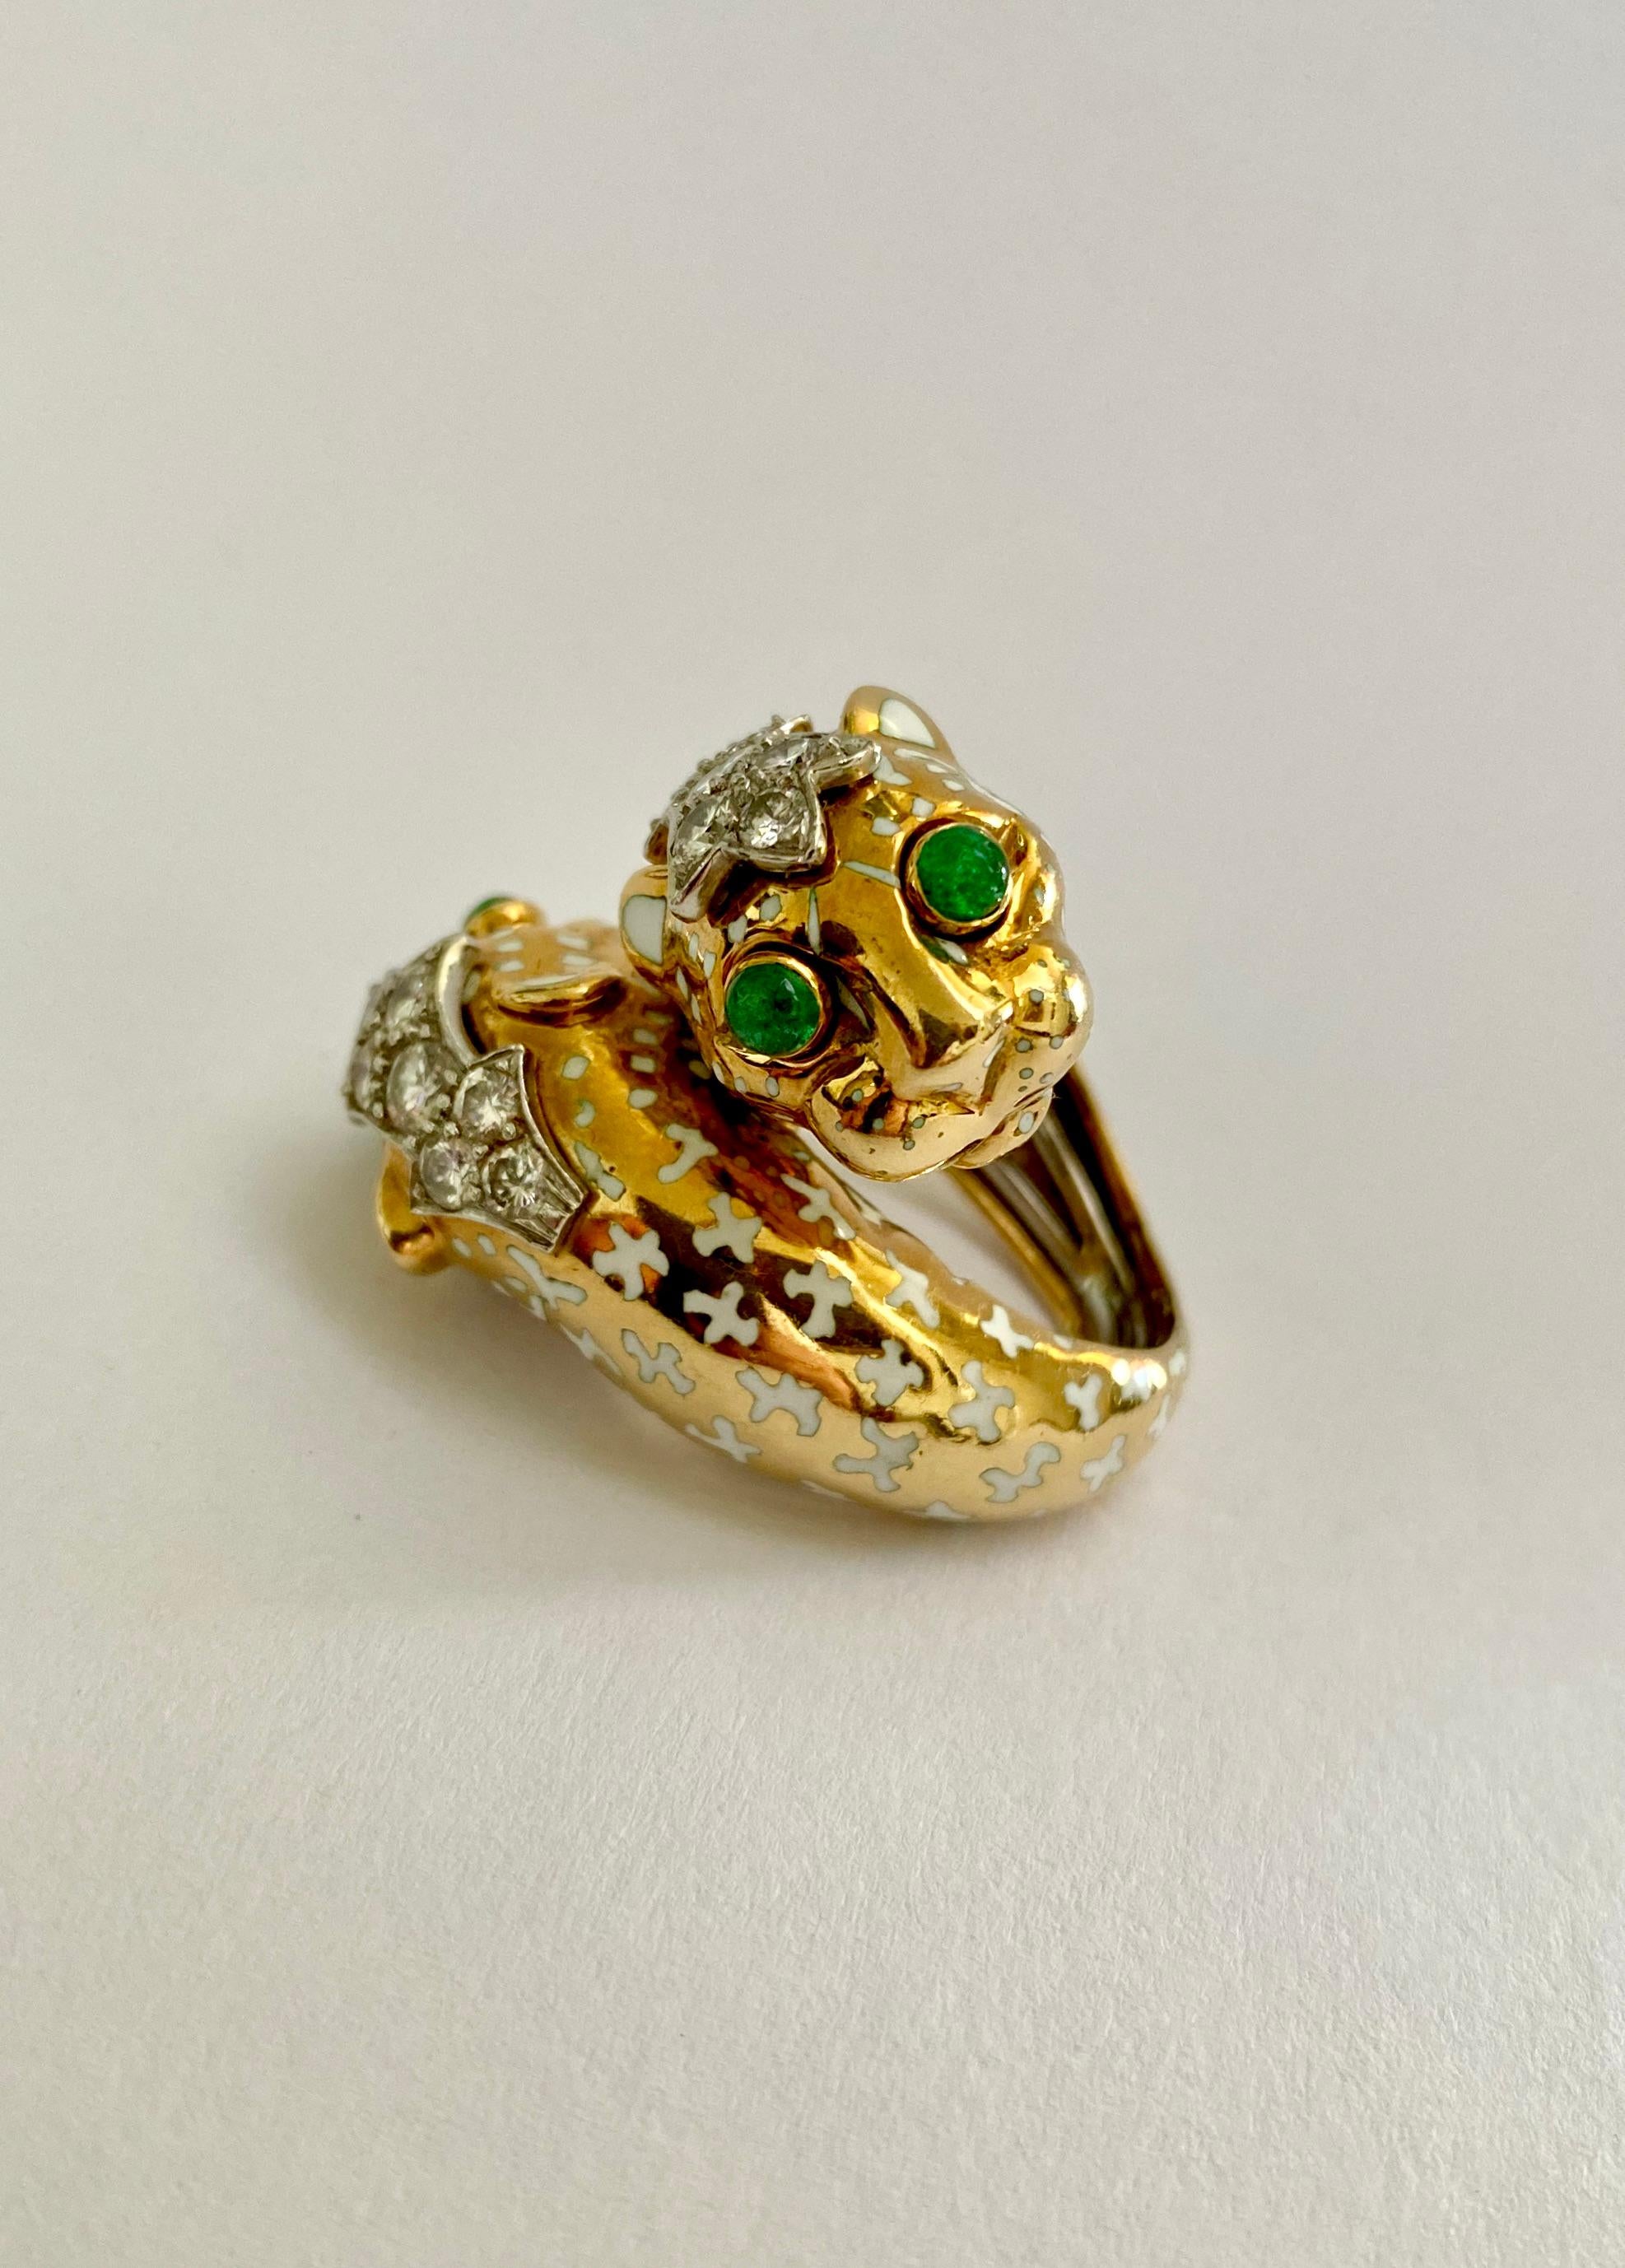 David Webb was known for his animals and this ring has all of his signature touches.  White enamel spots, bright green cabochon emerald eyes and just the sparkle of diamonds make this an iconic Webb design.  This particular ring goes all the way